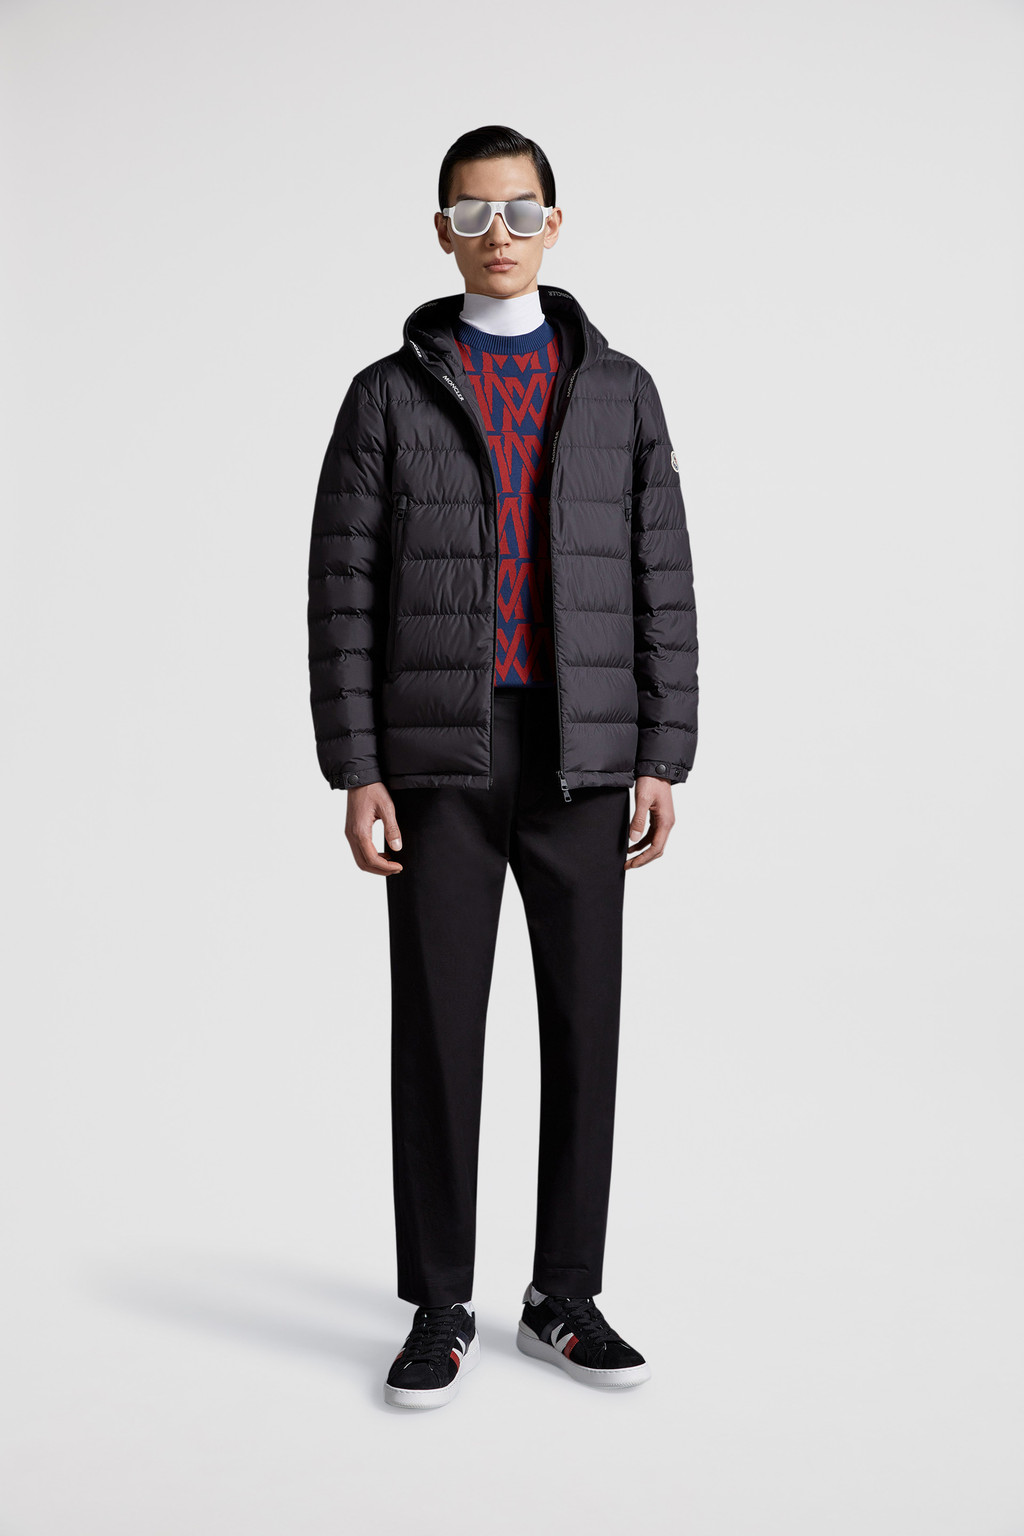 UNIQLO｜PUFFTECH & Ultra Light Down Collection | Online store